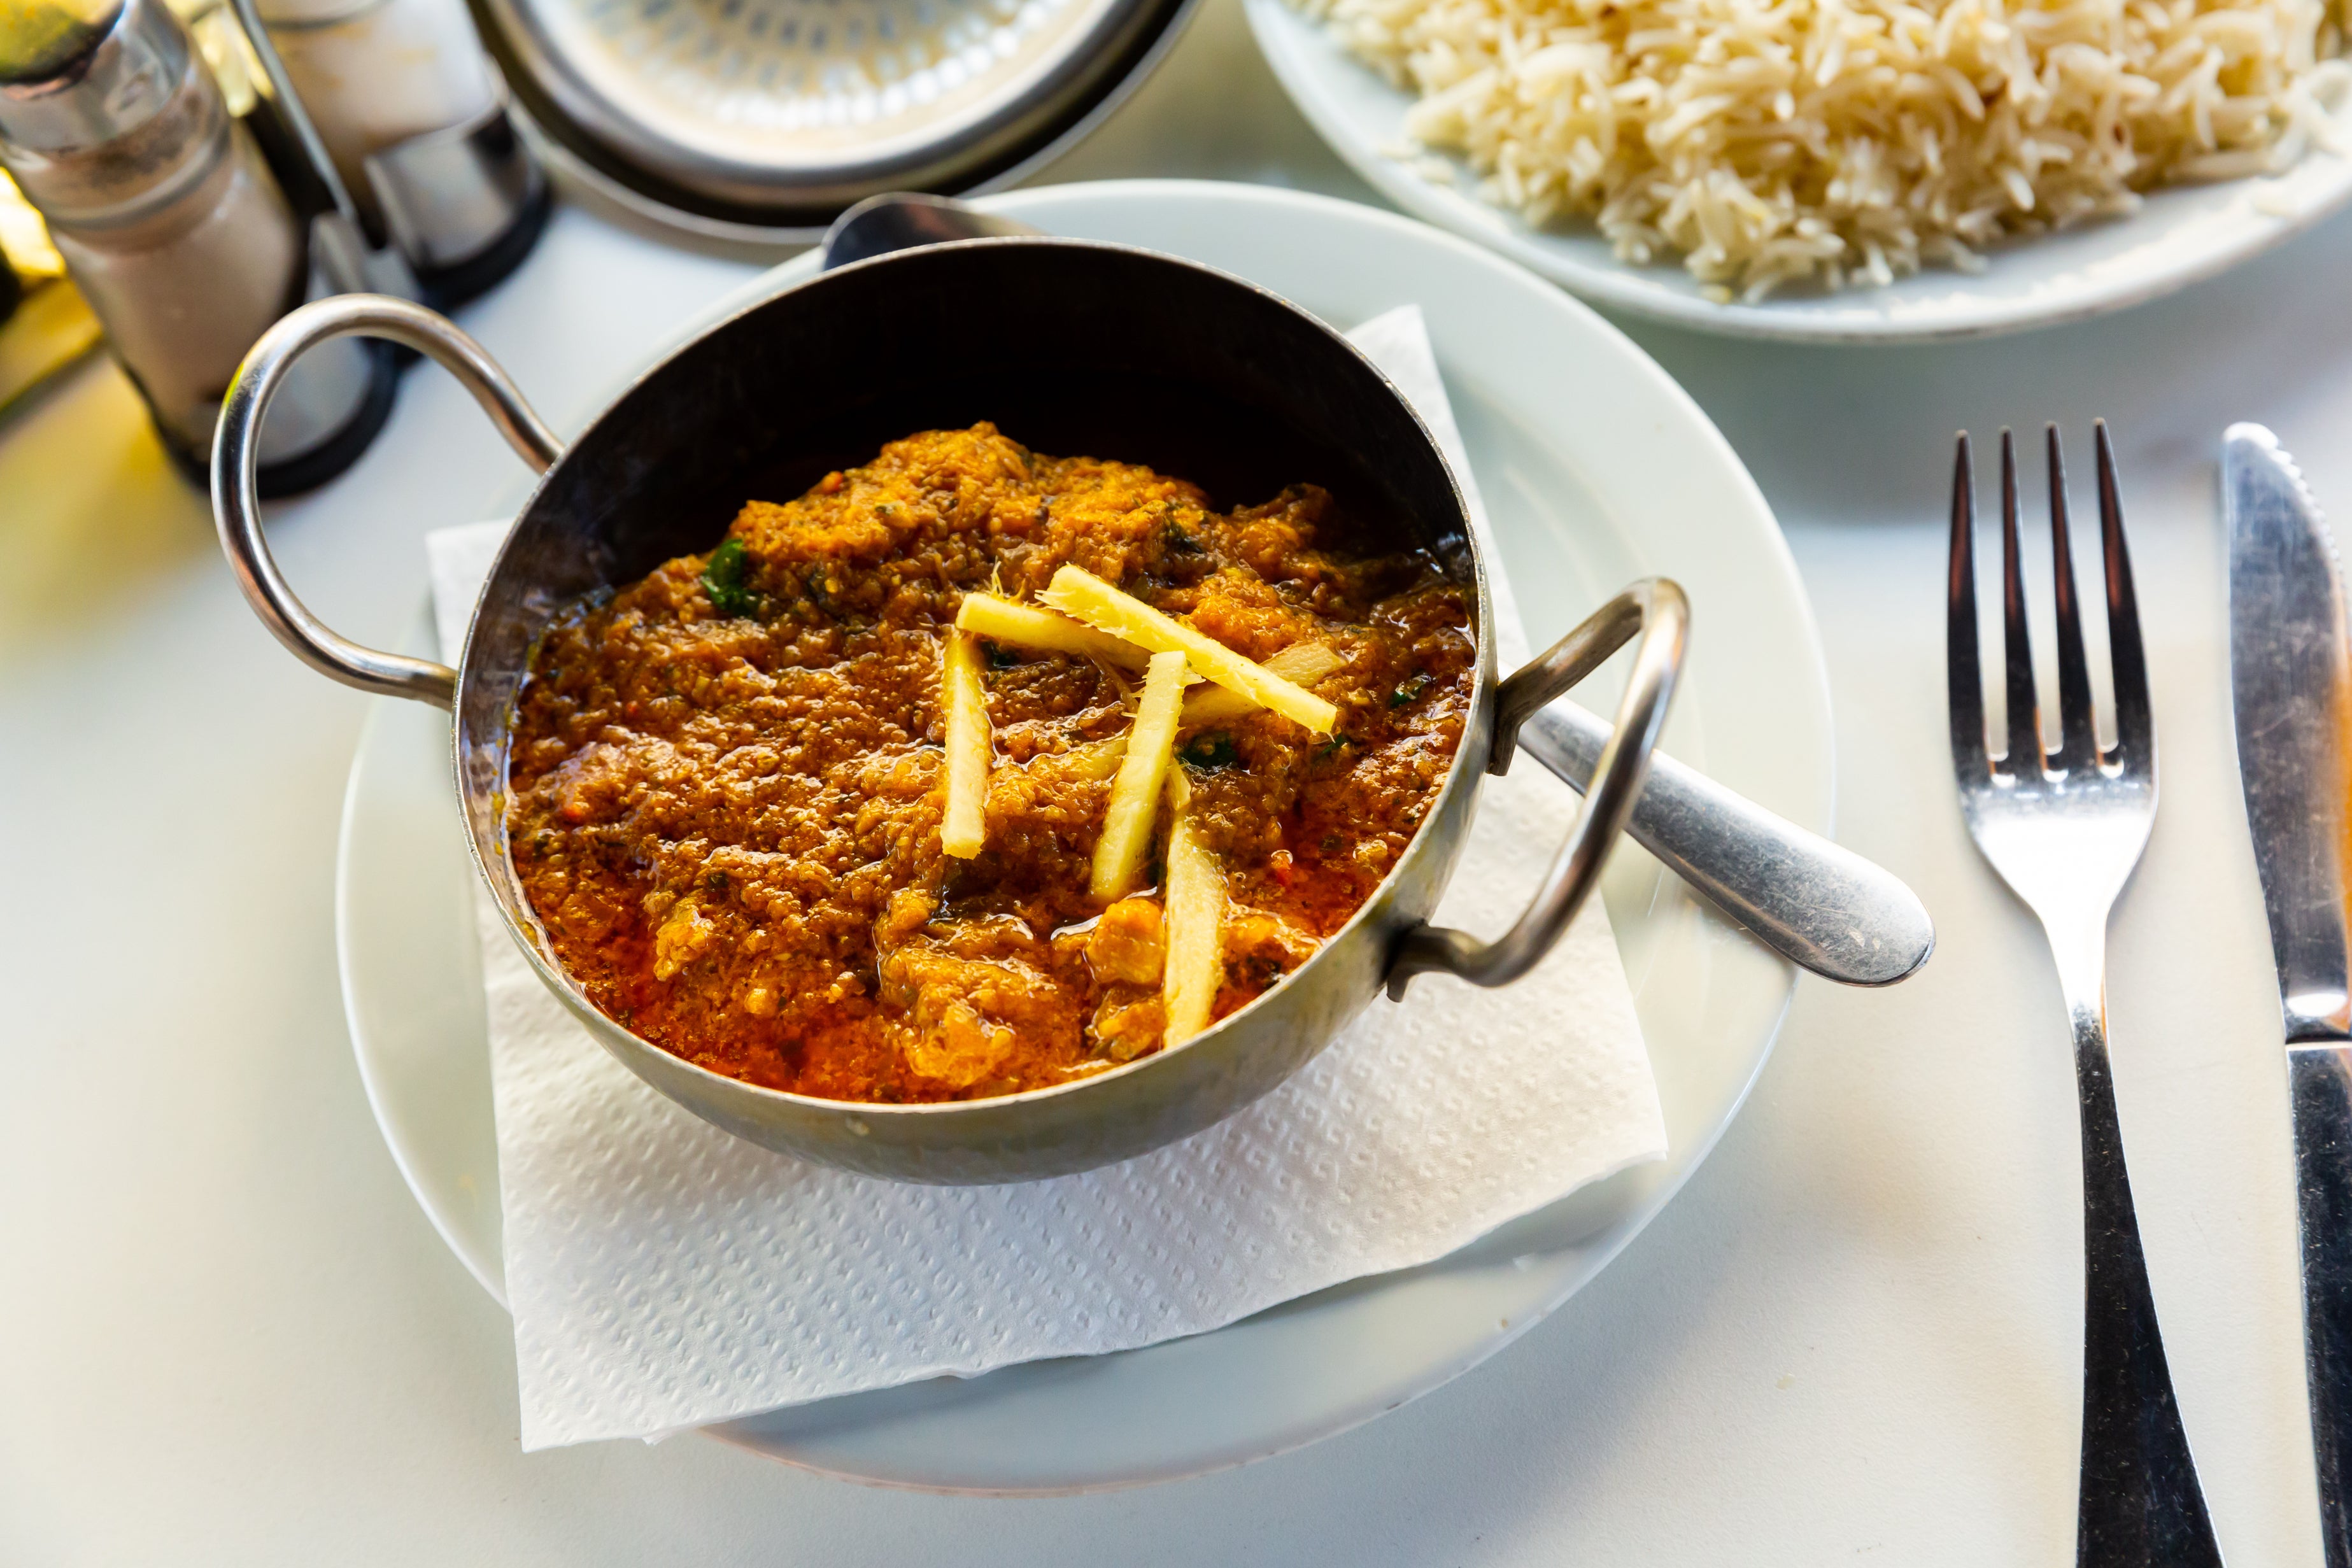 A popular lamb curry from west Bengal